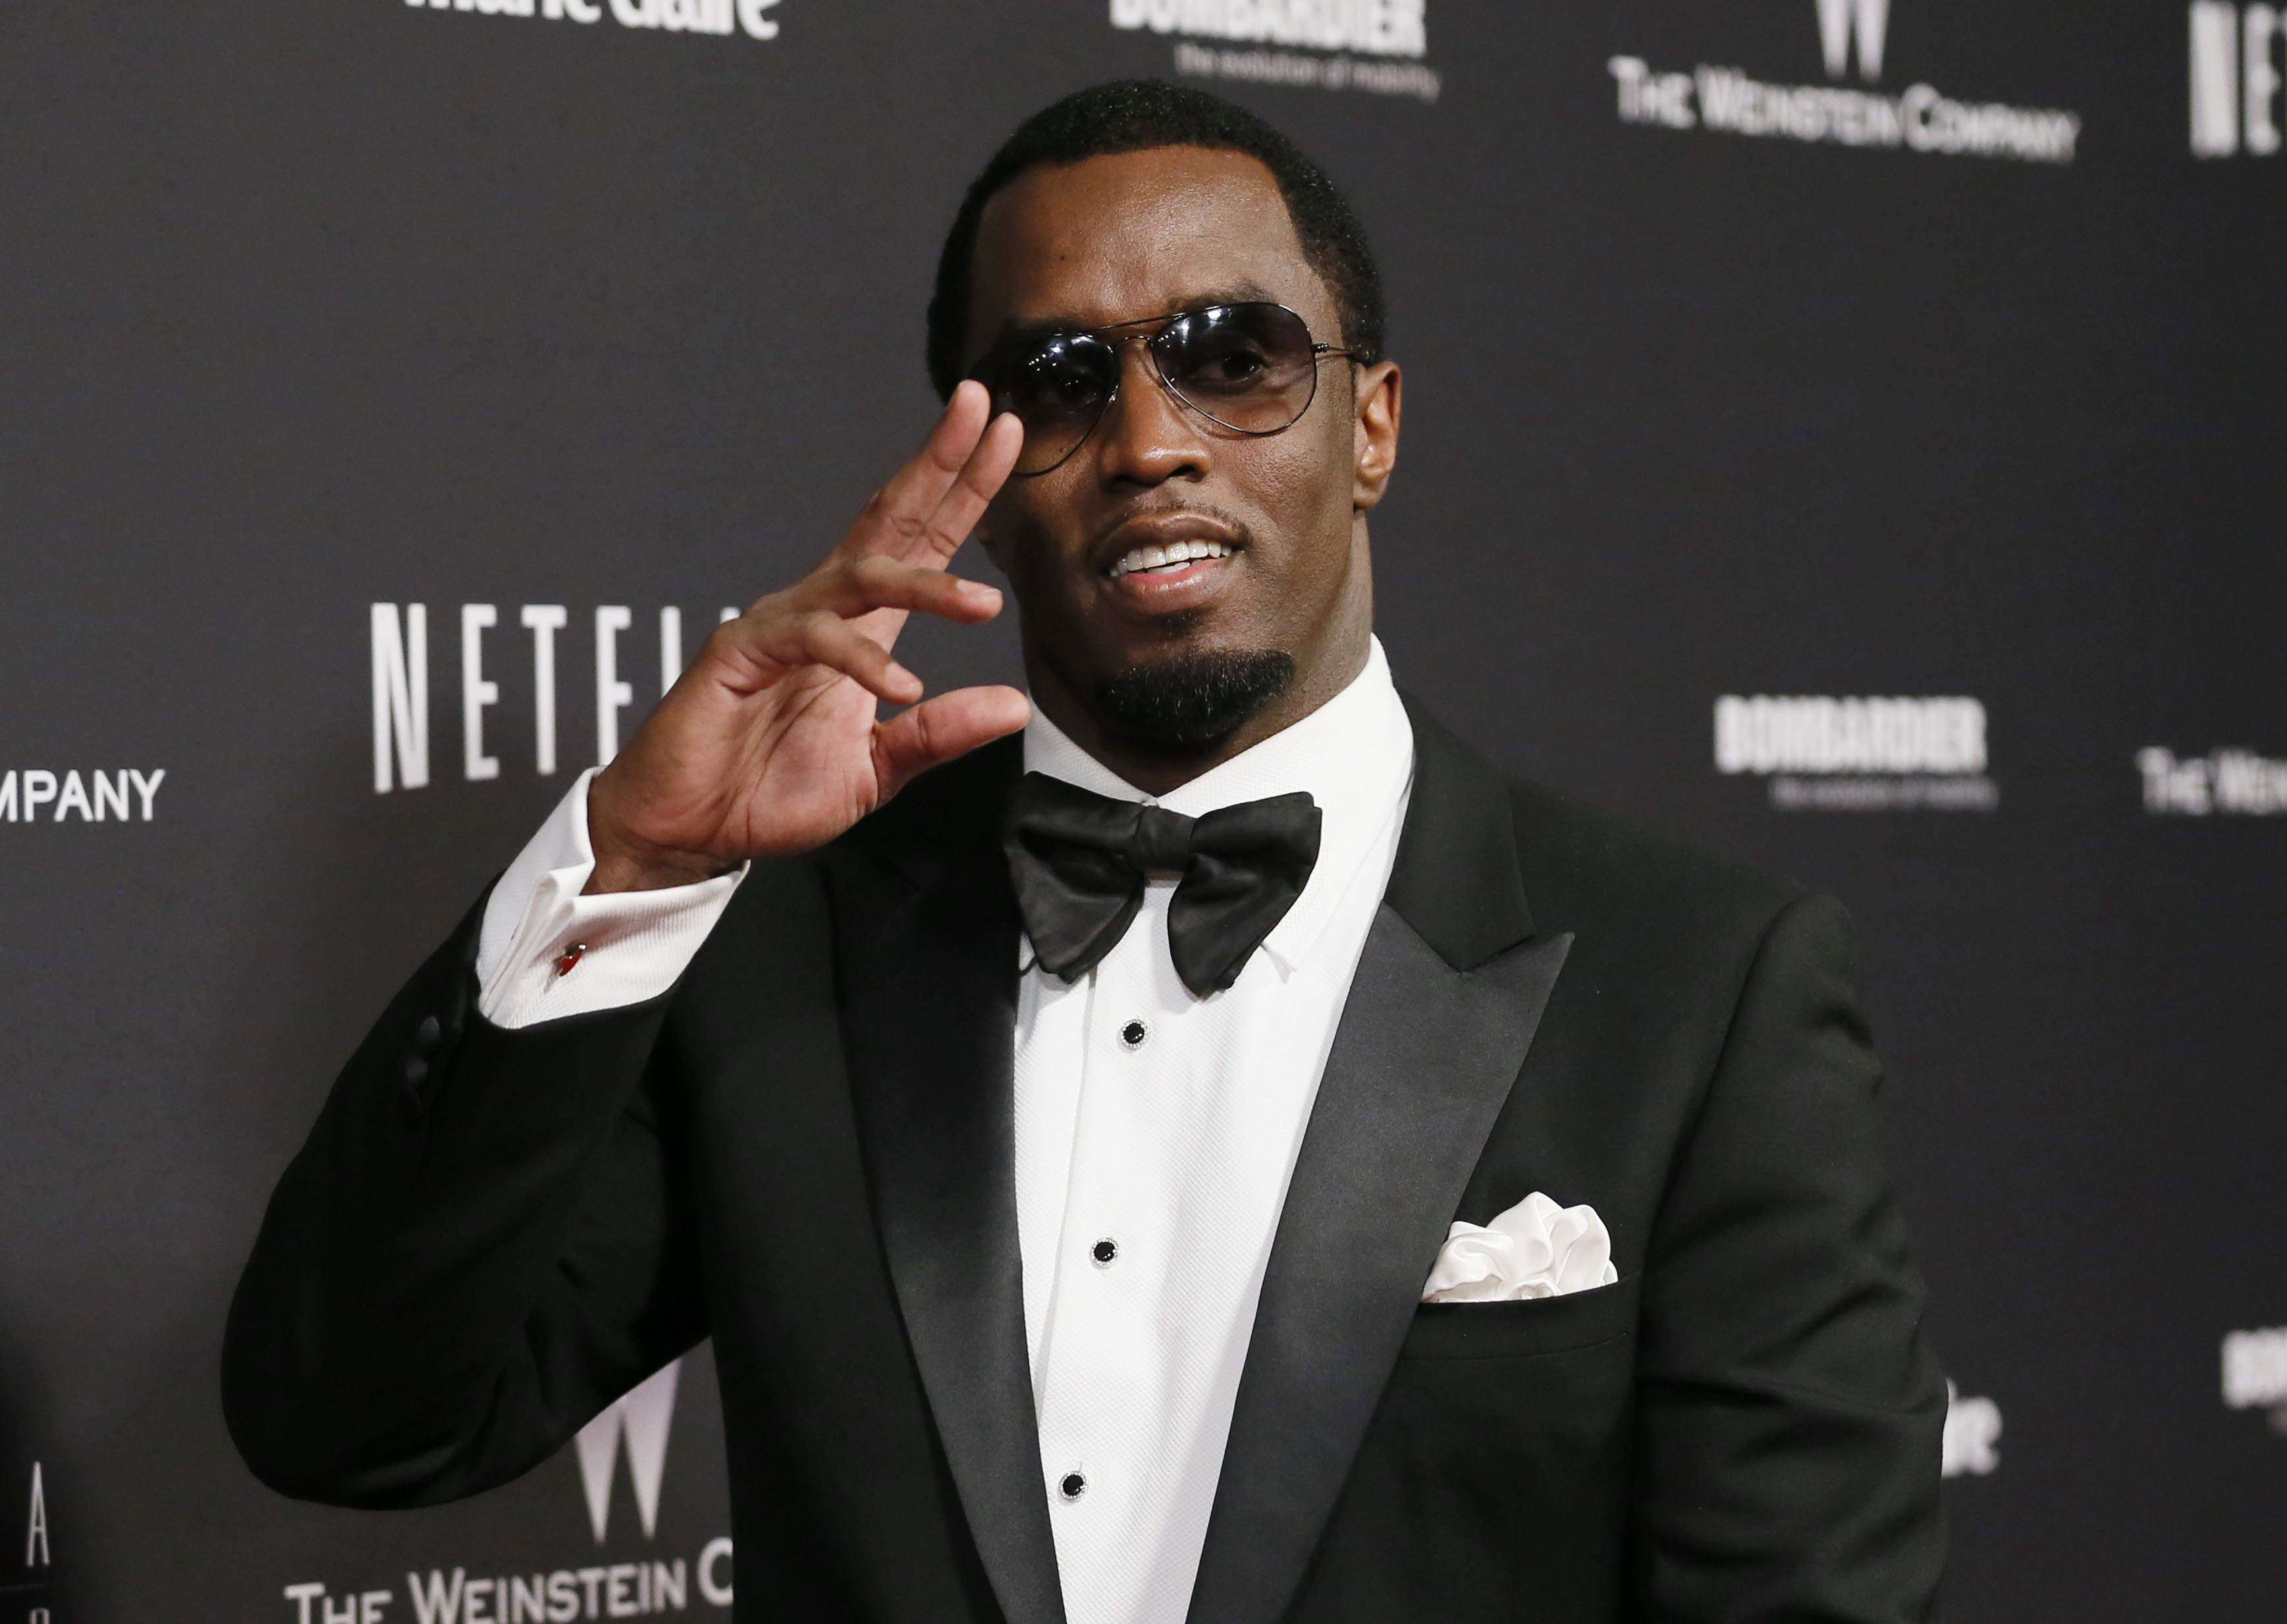  ARTIST FORMERLY KNOWN AS PUFF DADDY CHANGES NAME AGAIN